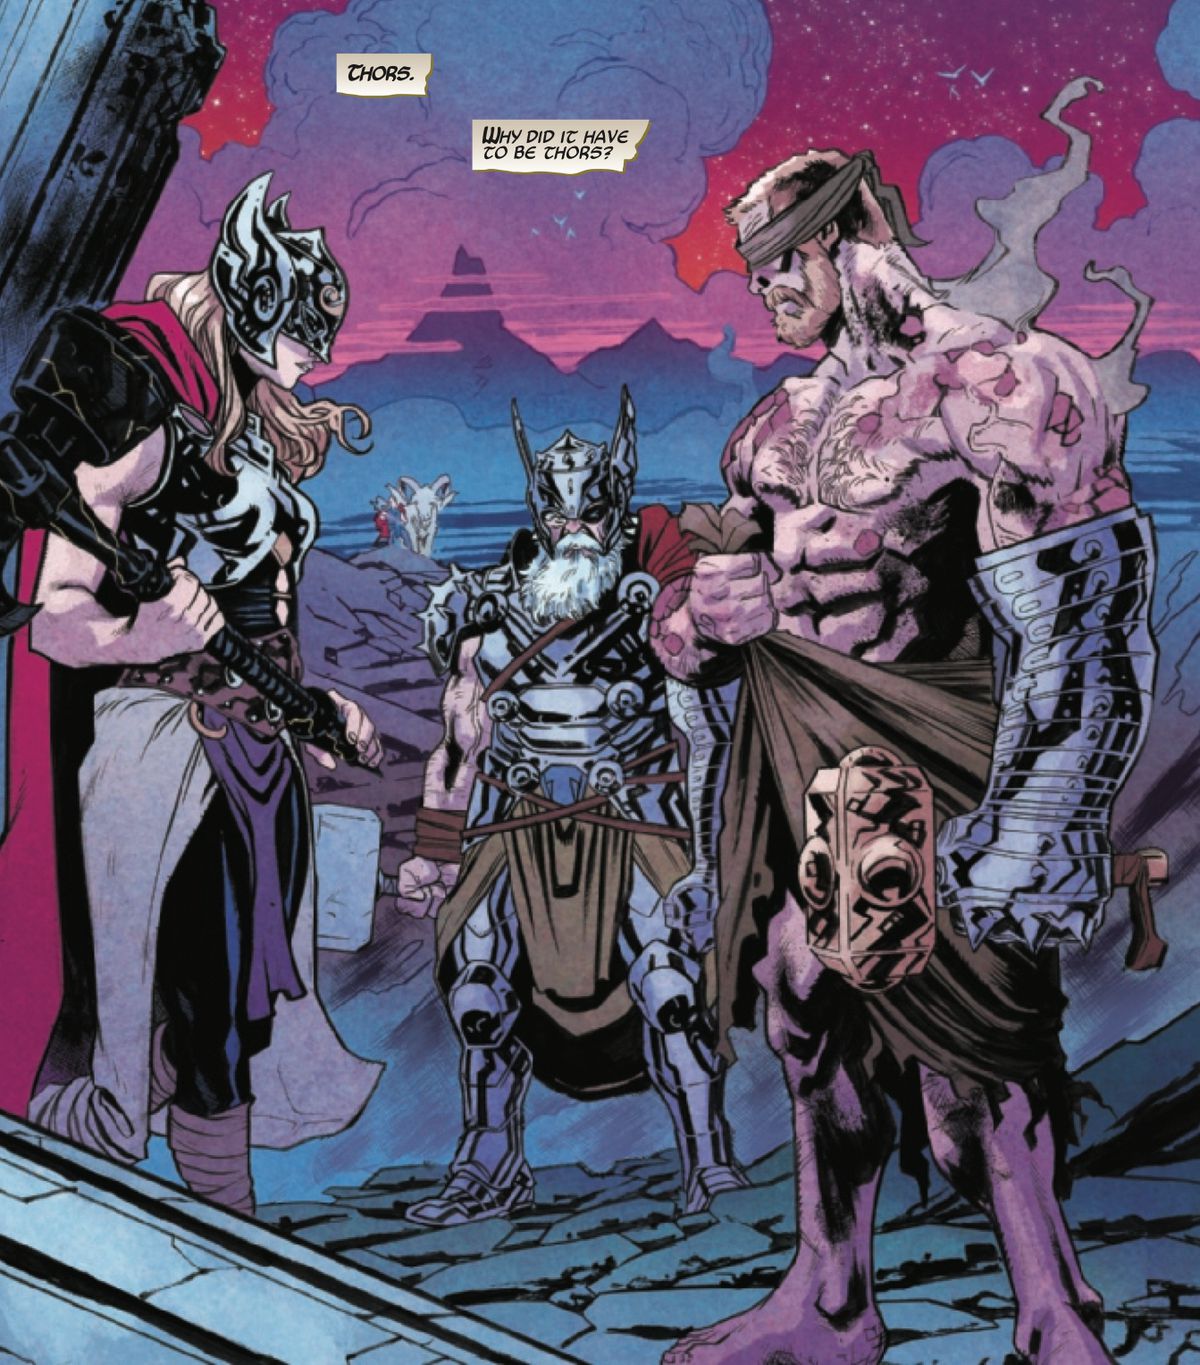 Jane foster as Thor, All-Father Thor, and Thor in Thor #14, Marvel Comics (2019). 